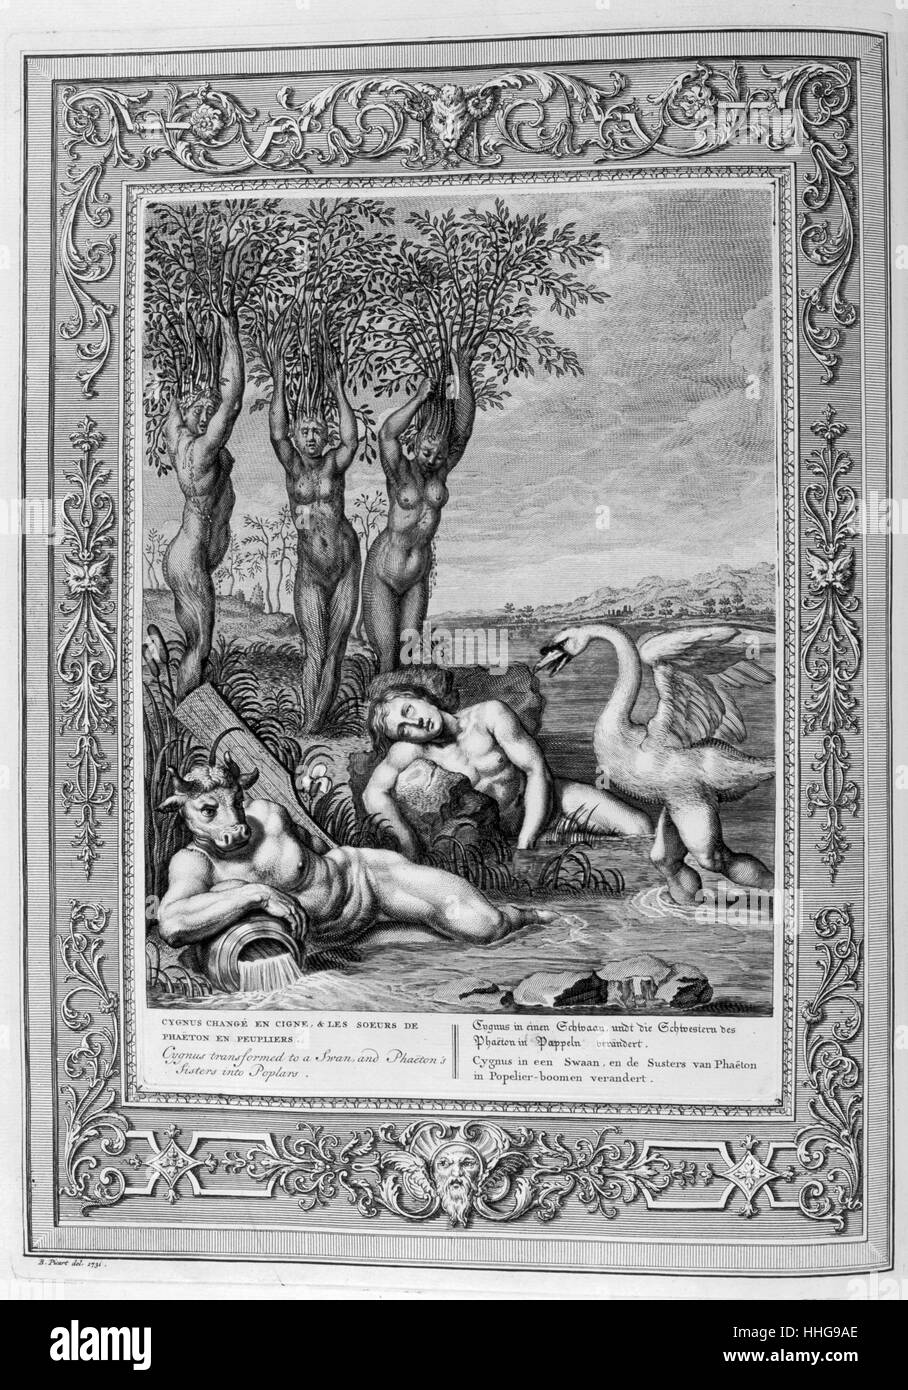 Cygnus changed into a swan. Engraved illustration from 'The Temple of the Muses', 1733. This book represented remarkable events of antiquity drawn and engraved by Bernard Picart (1673-1733). Eustathius of Thessalonica informs that Ares changed Cygnus into a swan rather than let him die by the hand of Heracles Stock Photo